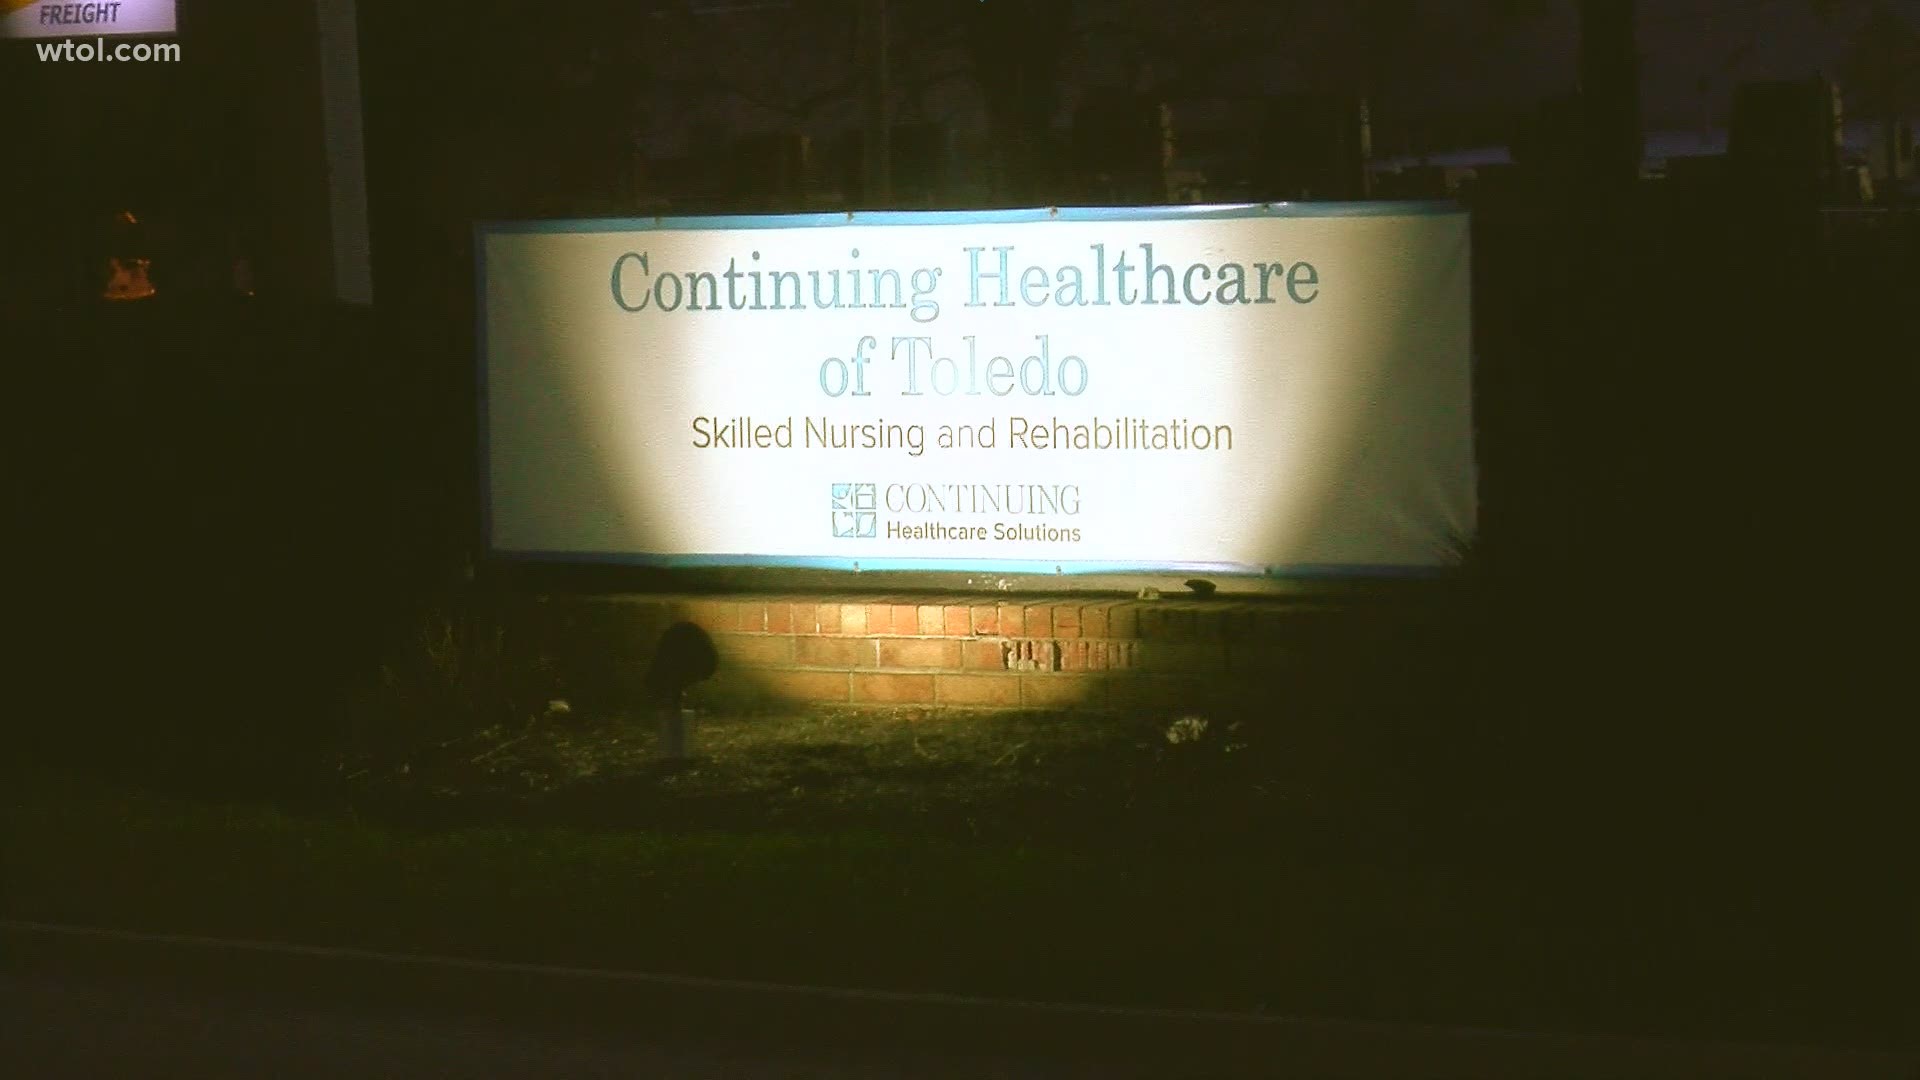 28 staff members at Toledo long-term care facility have been infected with COVID in past year.